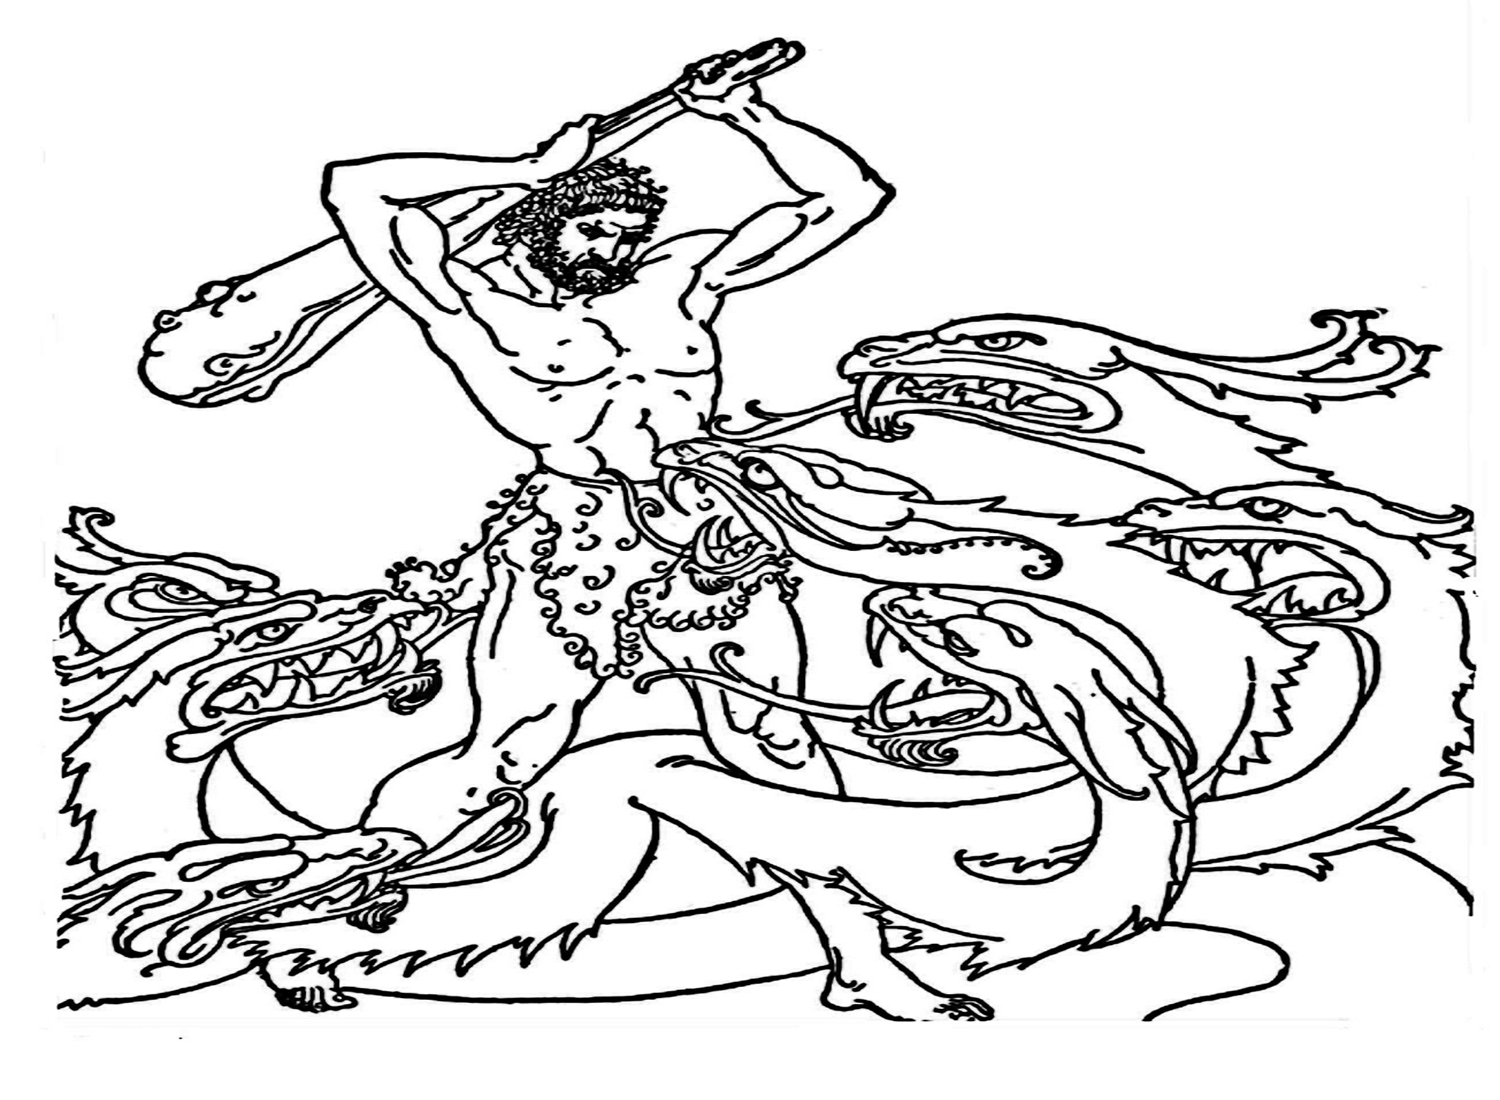 Heracles Fighting The Hydra Coloring Page